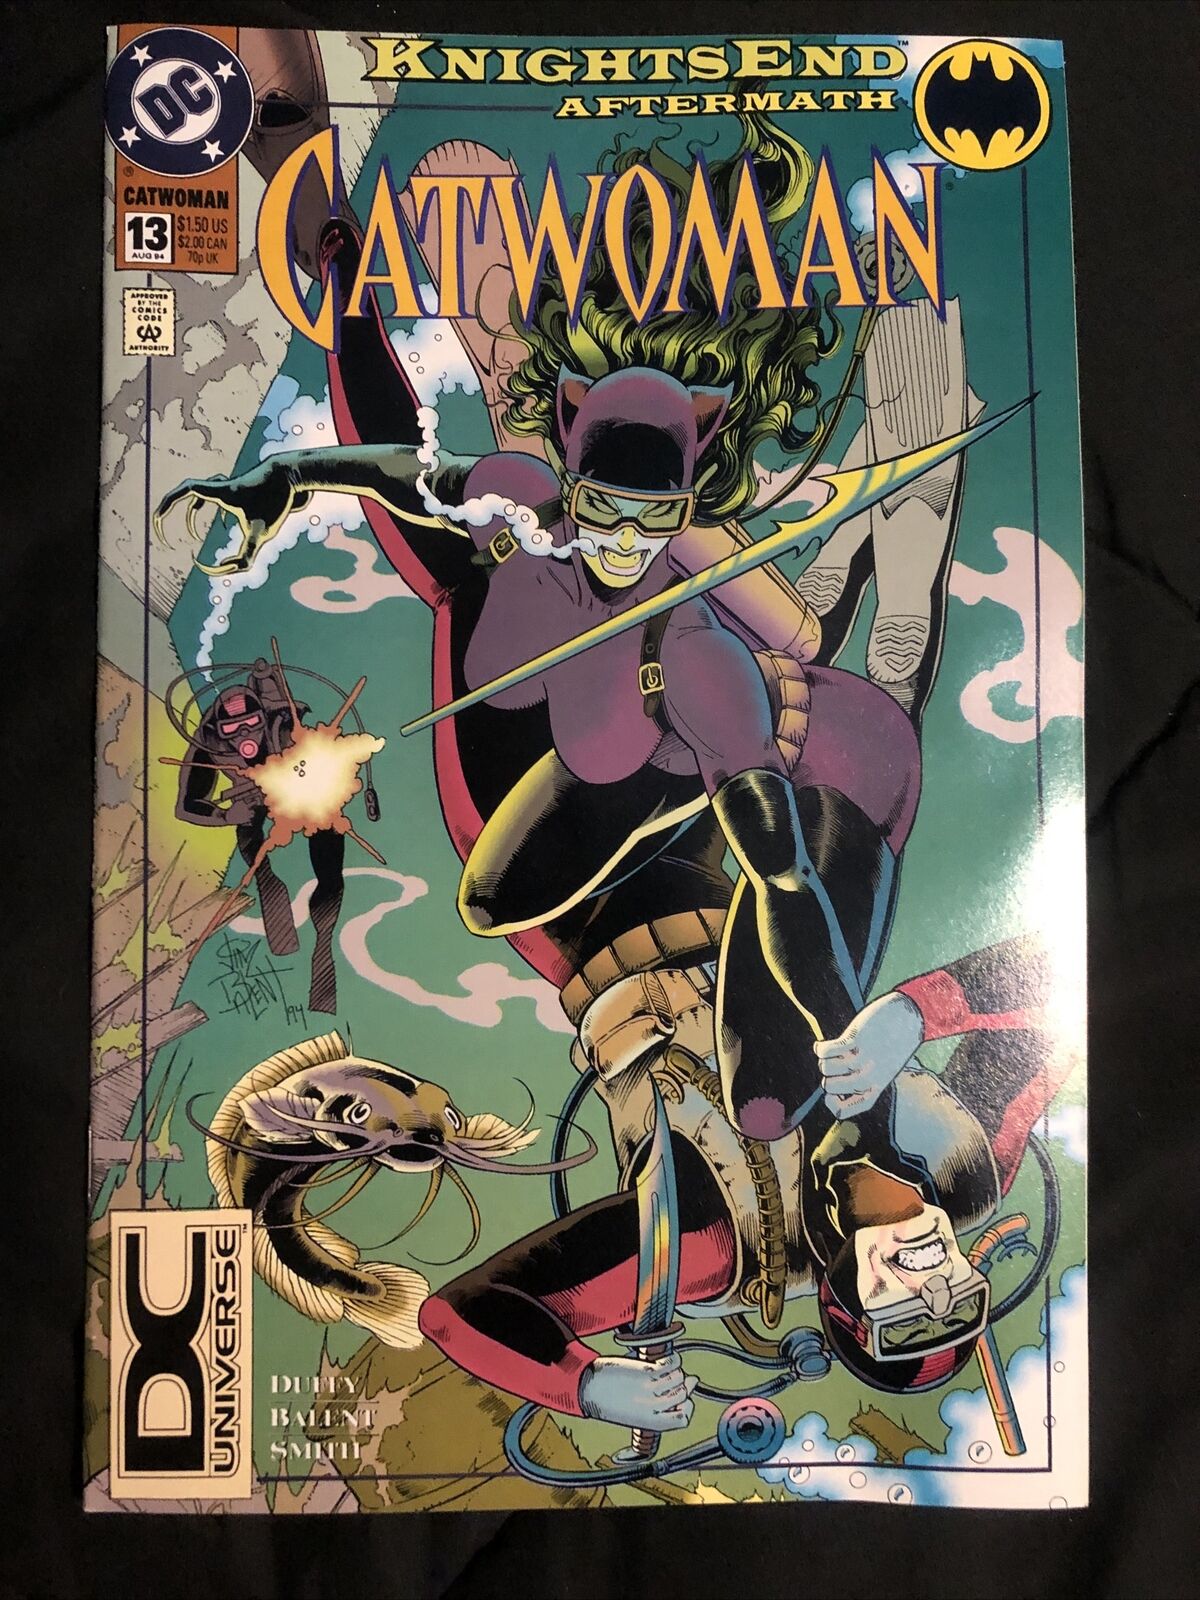 CATWOMAN # 13 DC COMICS August 1994 UNIVERSE LOGO VARIANT KNIGHTS END AFTERMATH